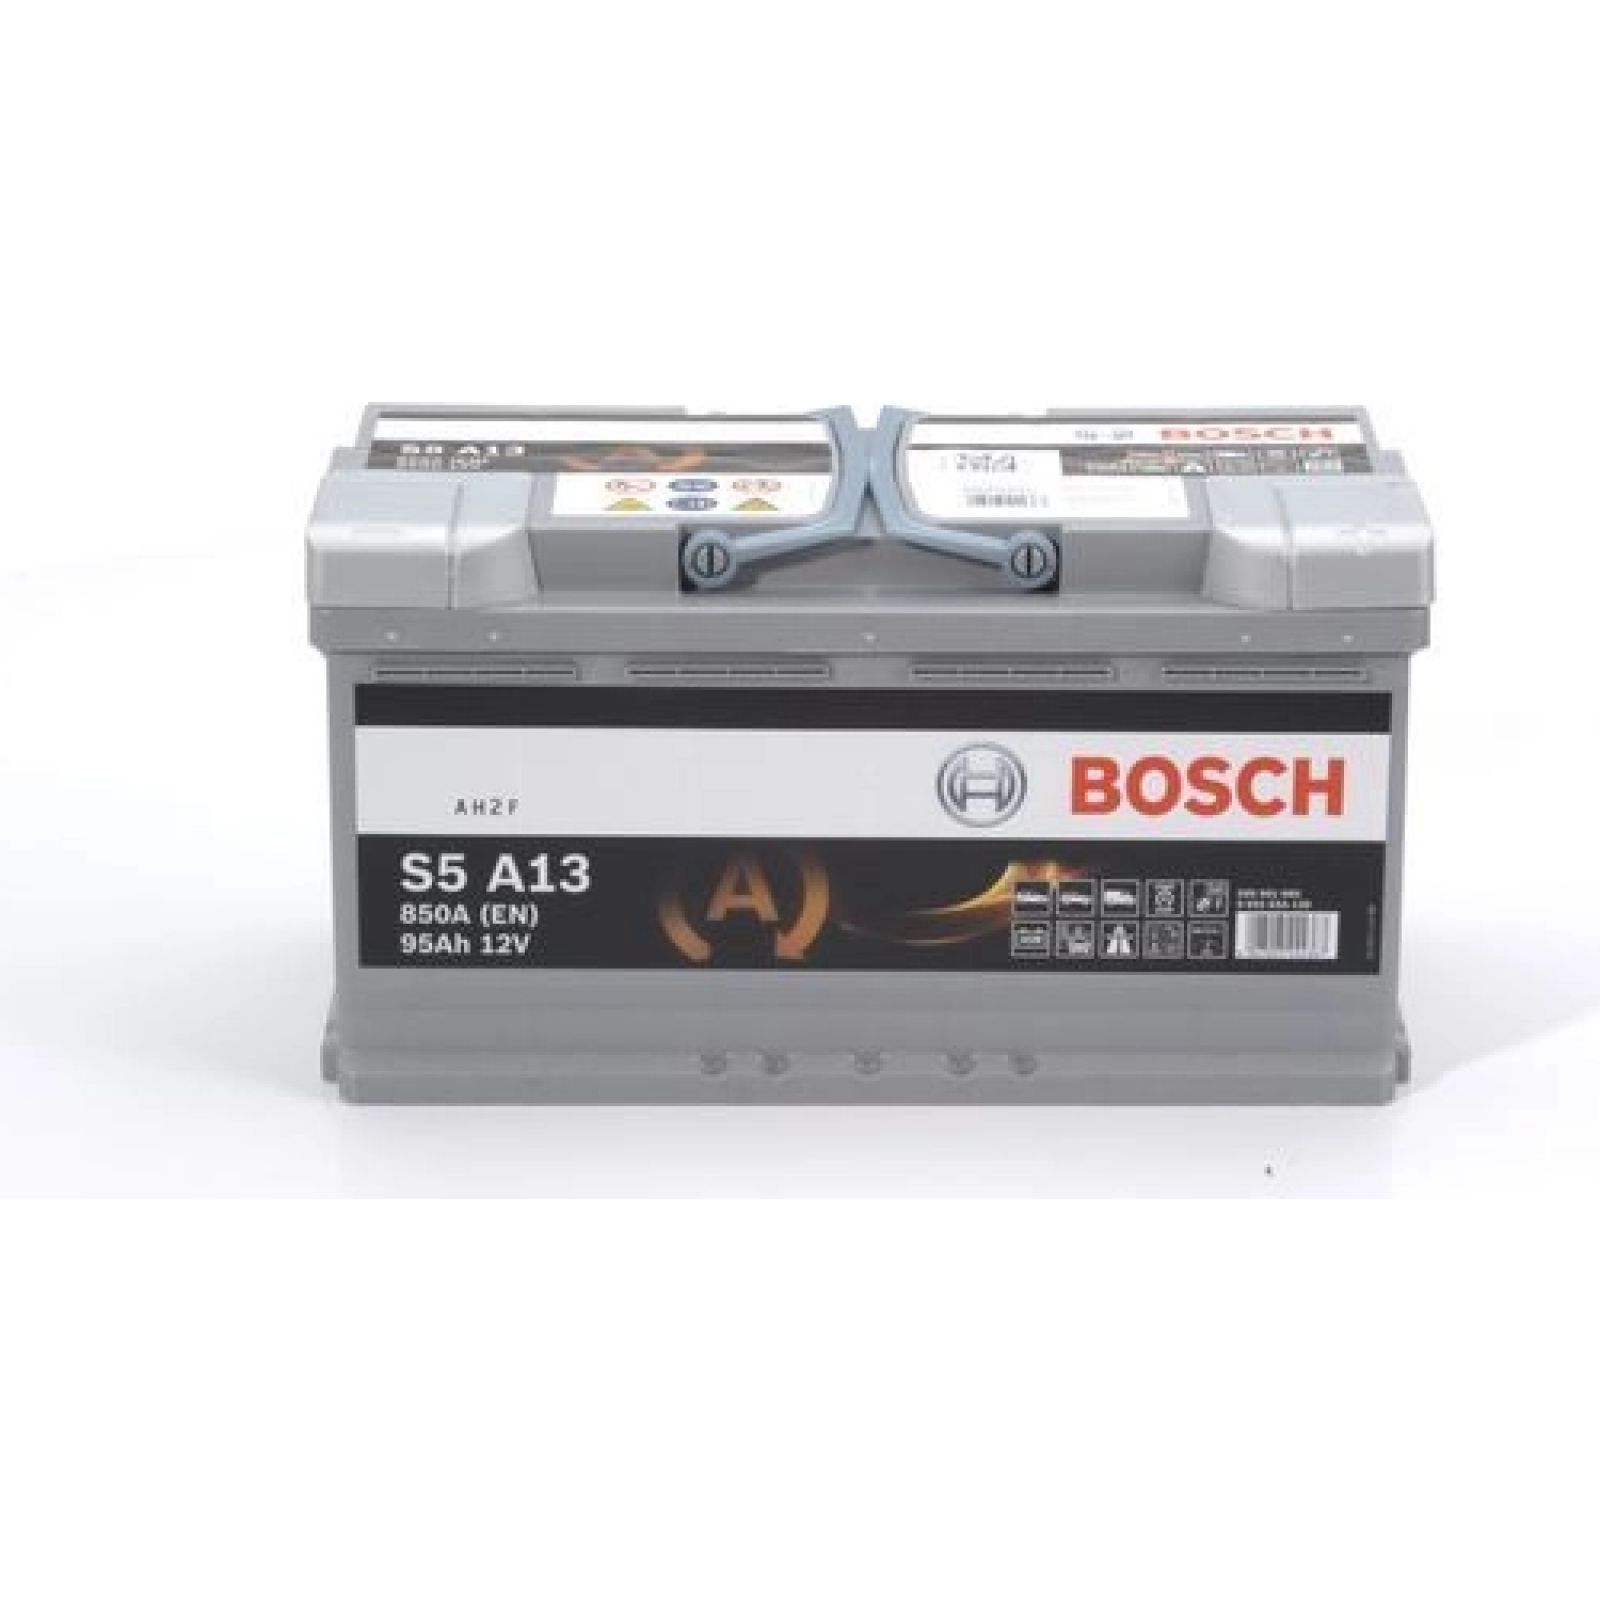 https://www.autoteile-store.at/img/product/s5-a13-bosch-pkw-batterie-agm-12v-95ah-850a-s5a-agm-0-092-s5a-130-62452/4f2fa9e613508c17690db6aa5f61c8cb_1600.jpg